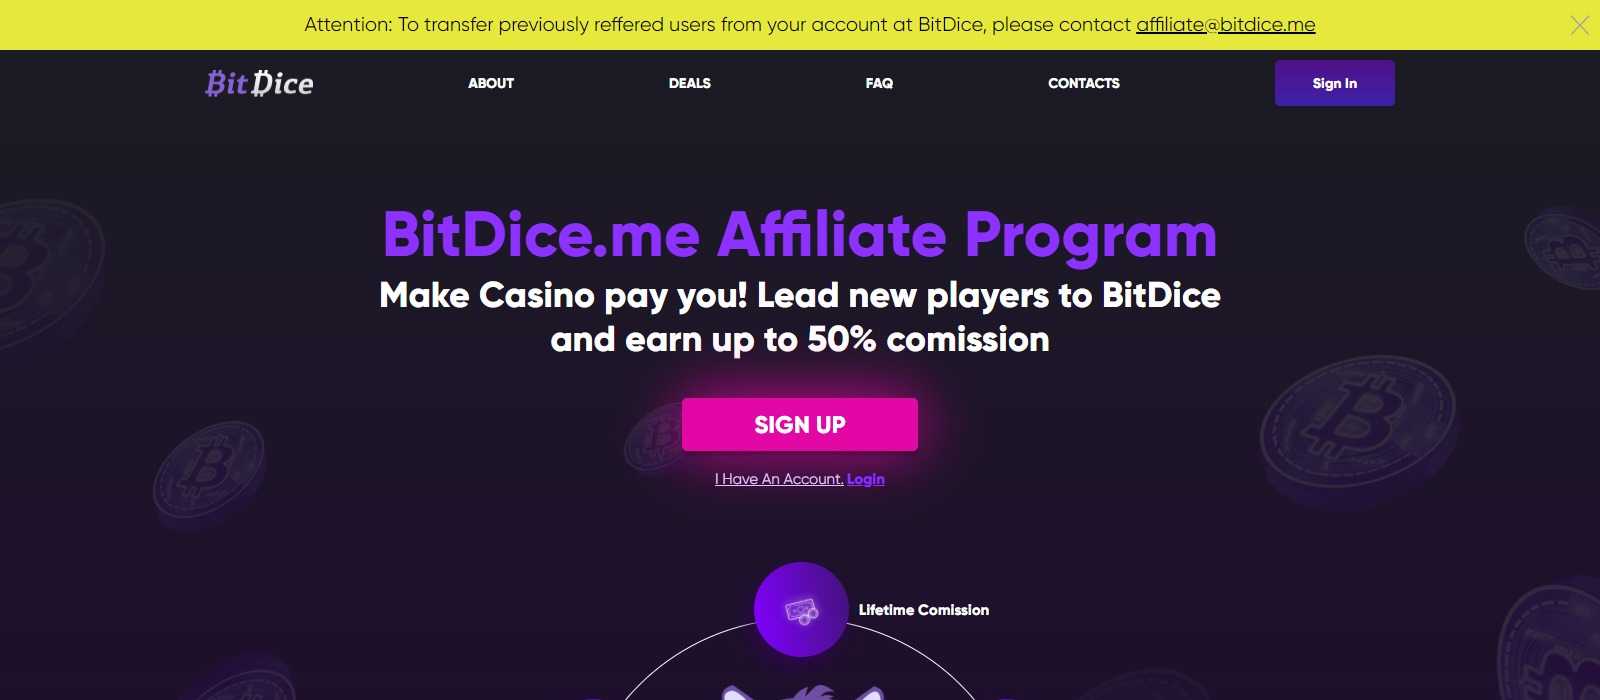 BitDice Affiliates Program Review: Get Earn 25% - 50% Recurring Revenue share